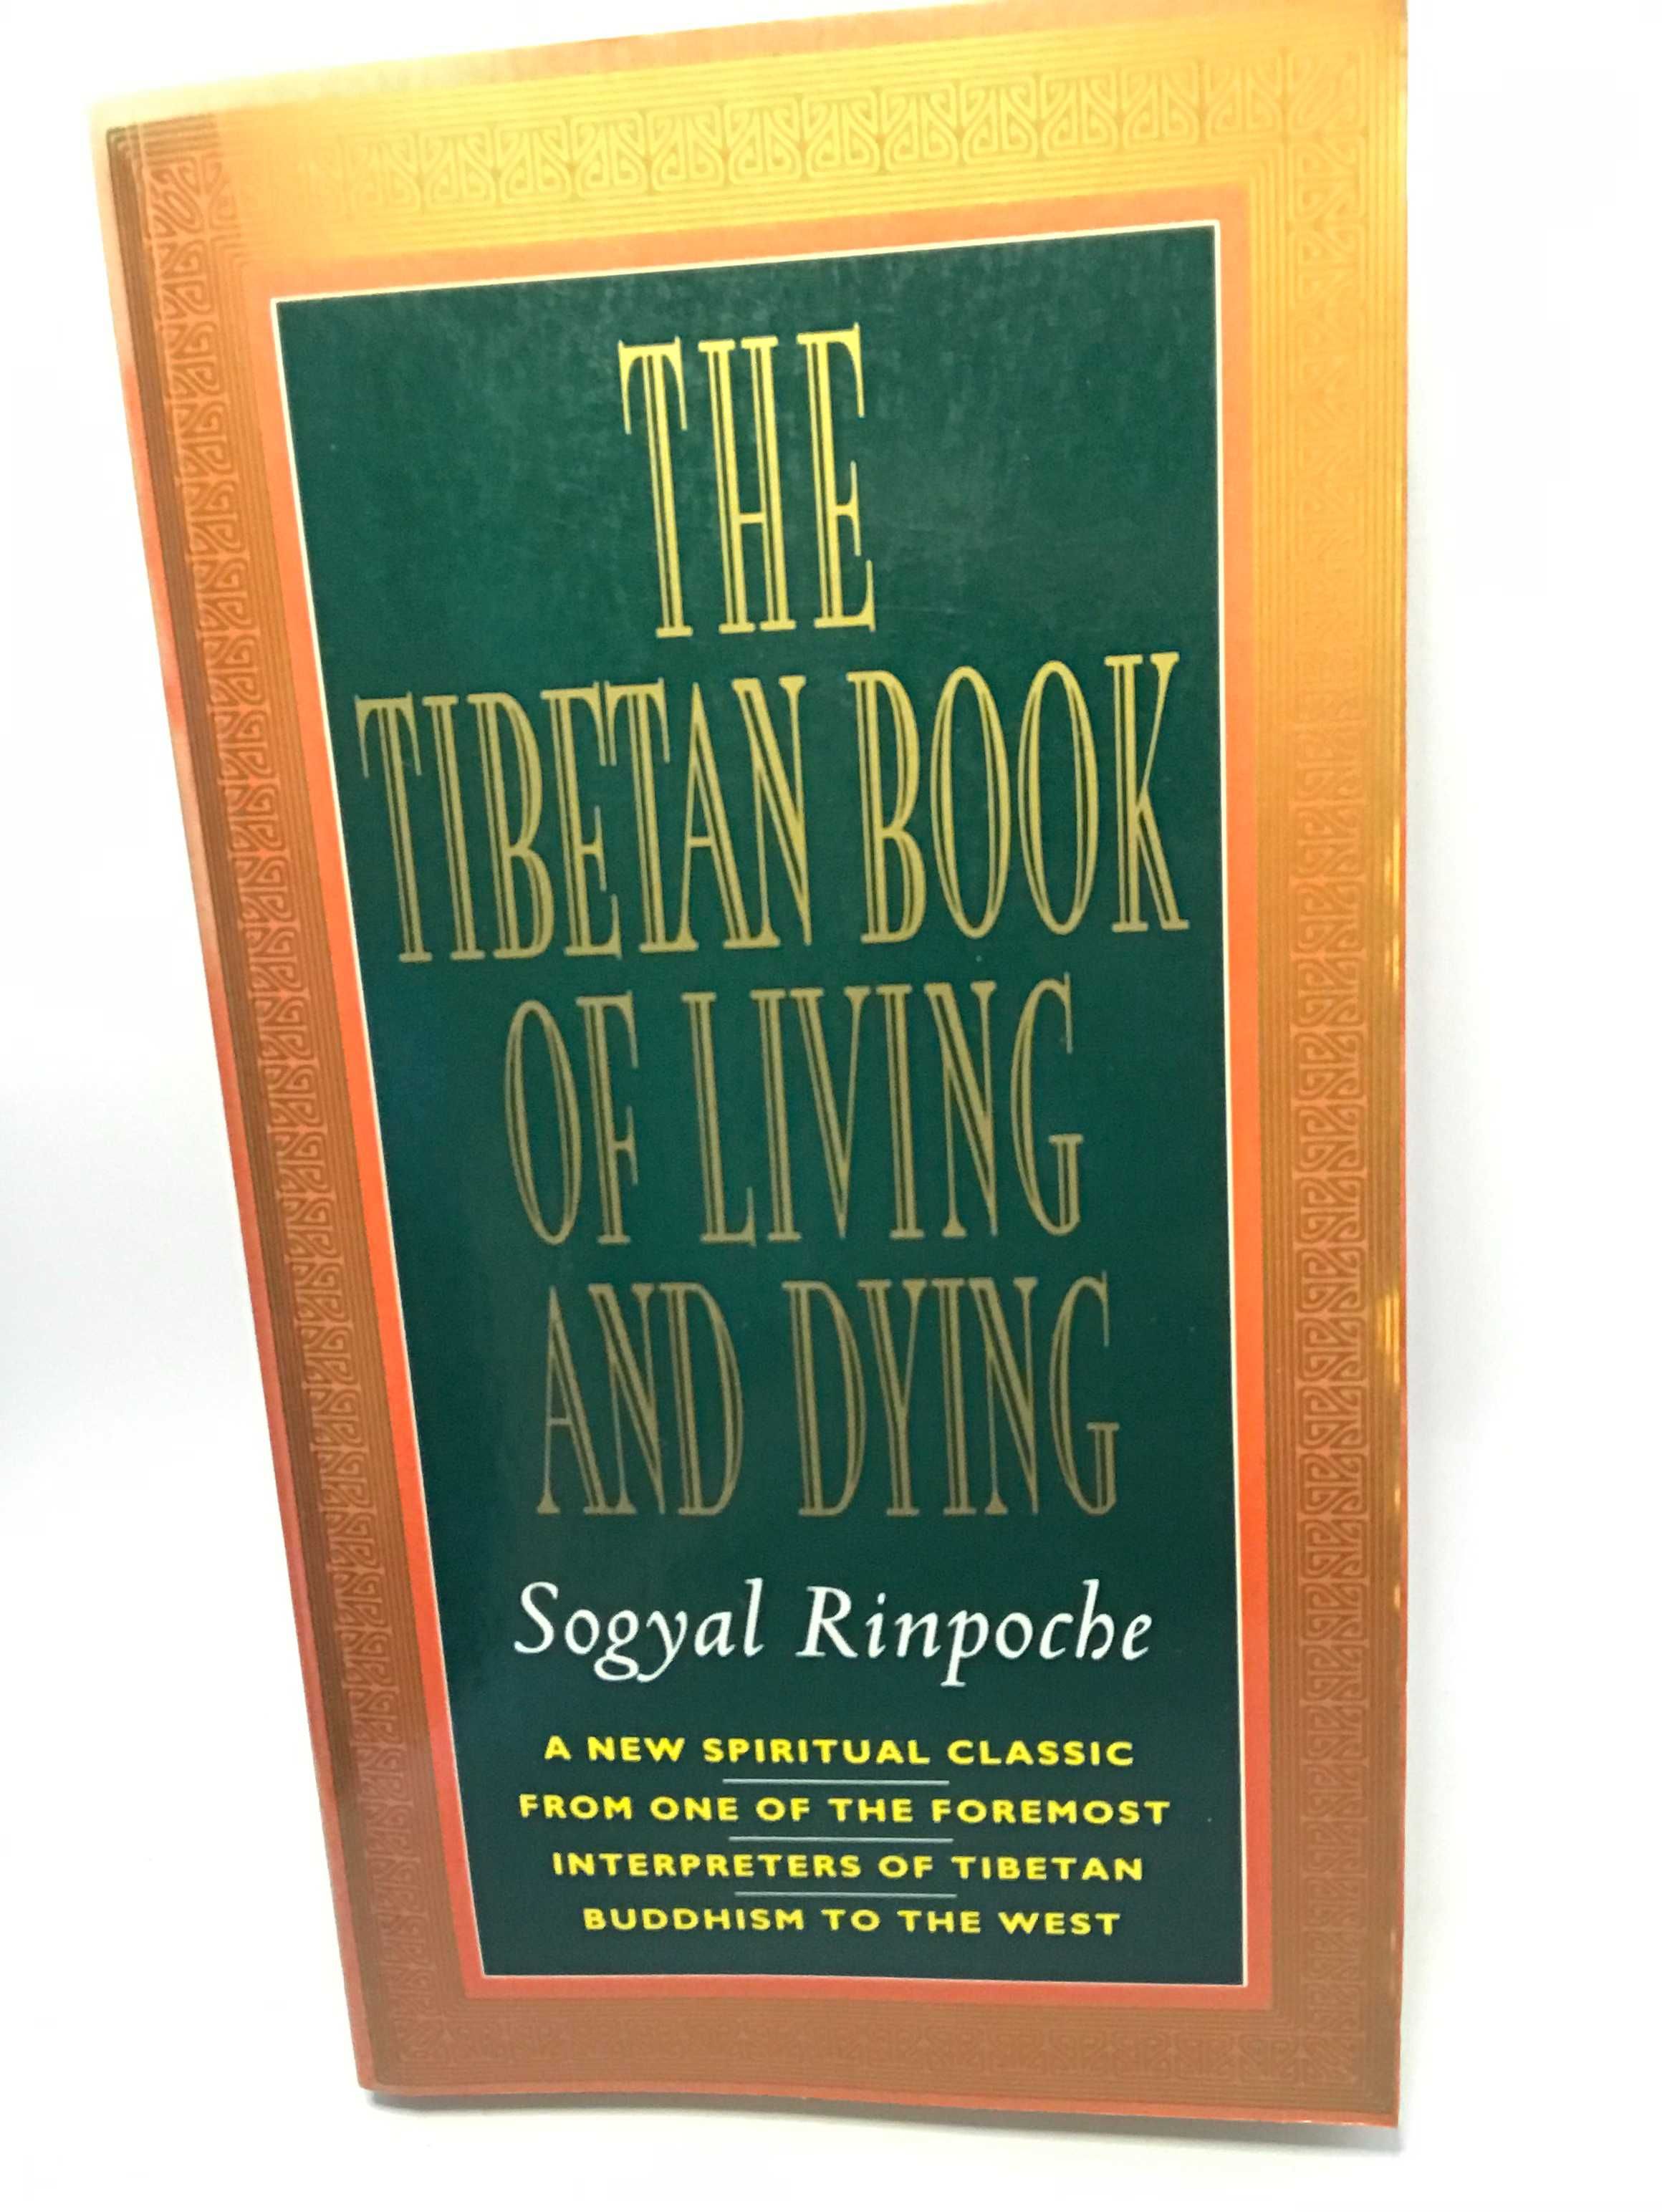 The Tibetan Book Of Living And Dying - Sogyal Rinpoche